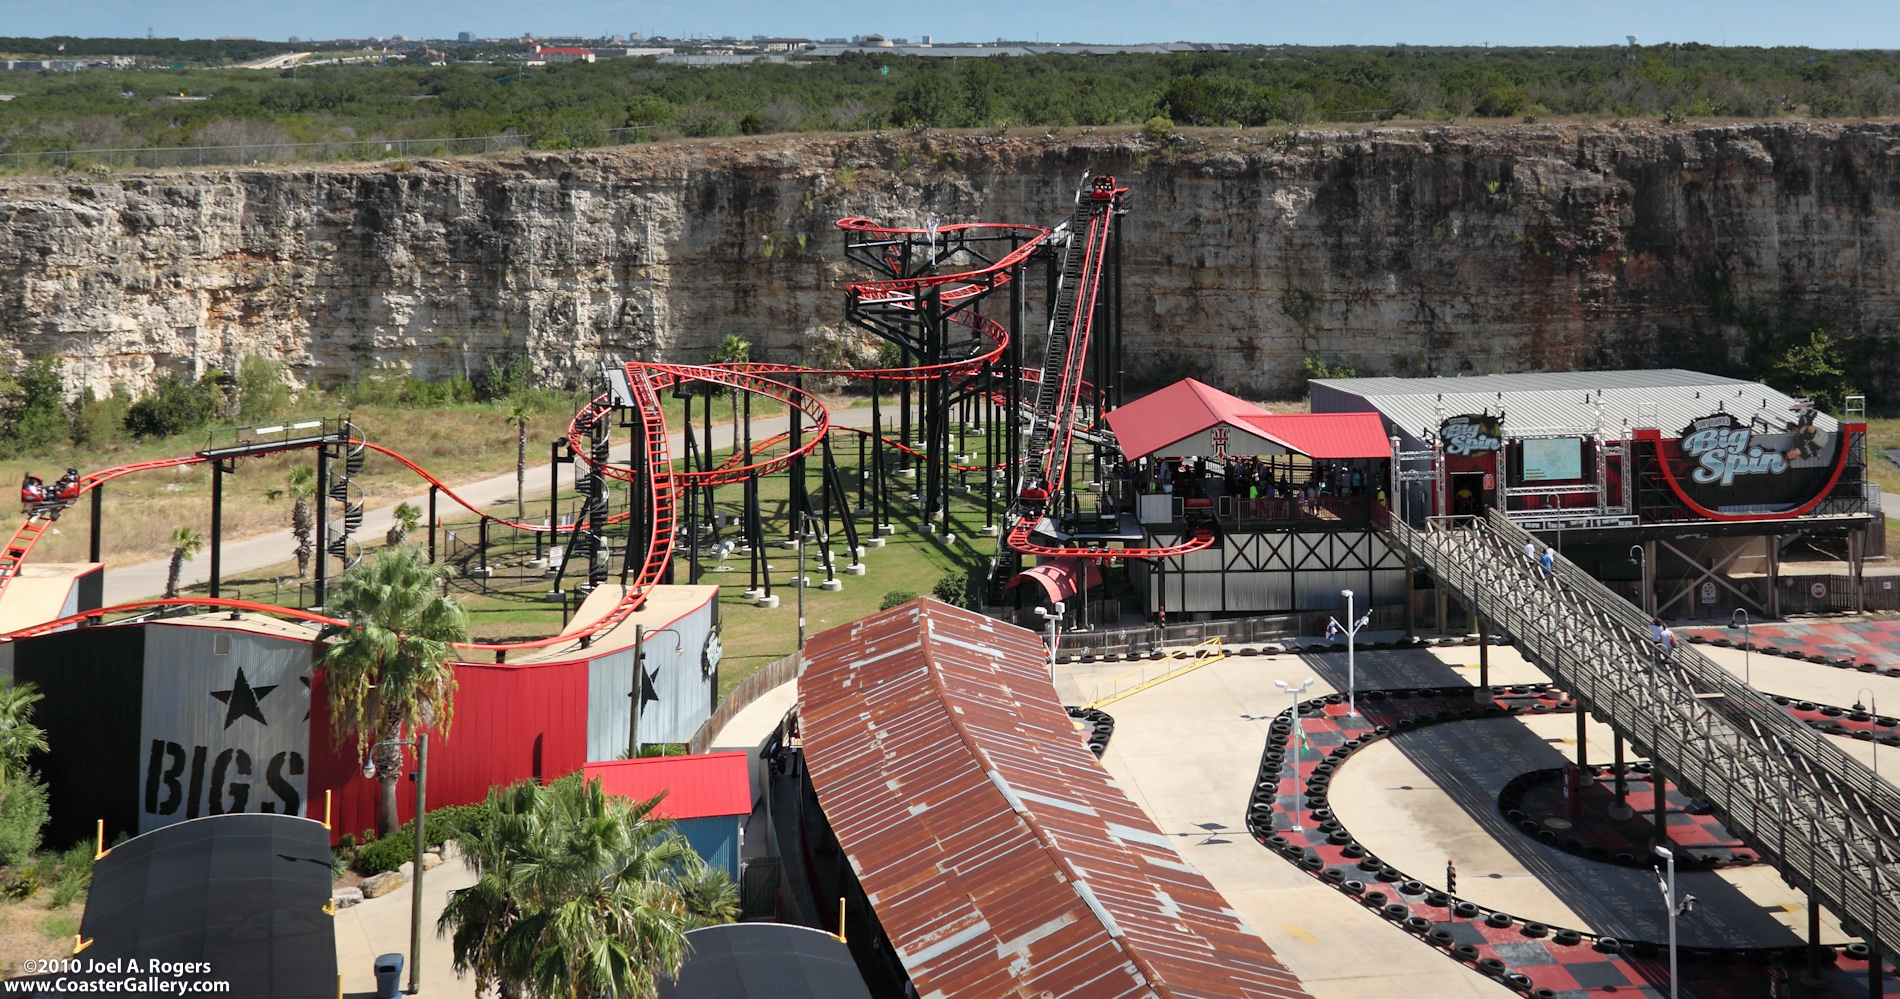 Aerial view of the Tony Hawk Big Spin roller coaster in Fiesta Texas